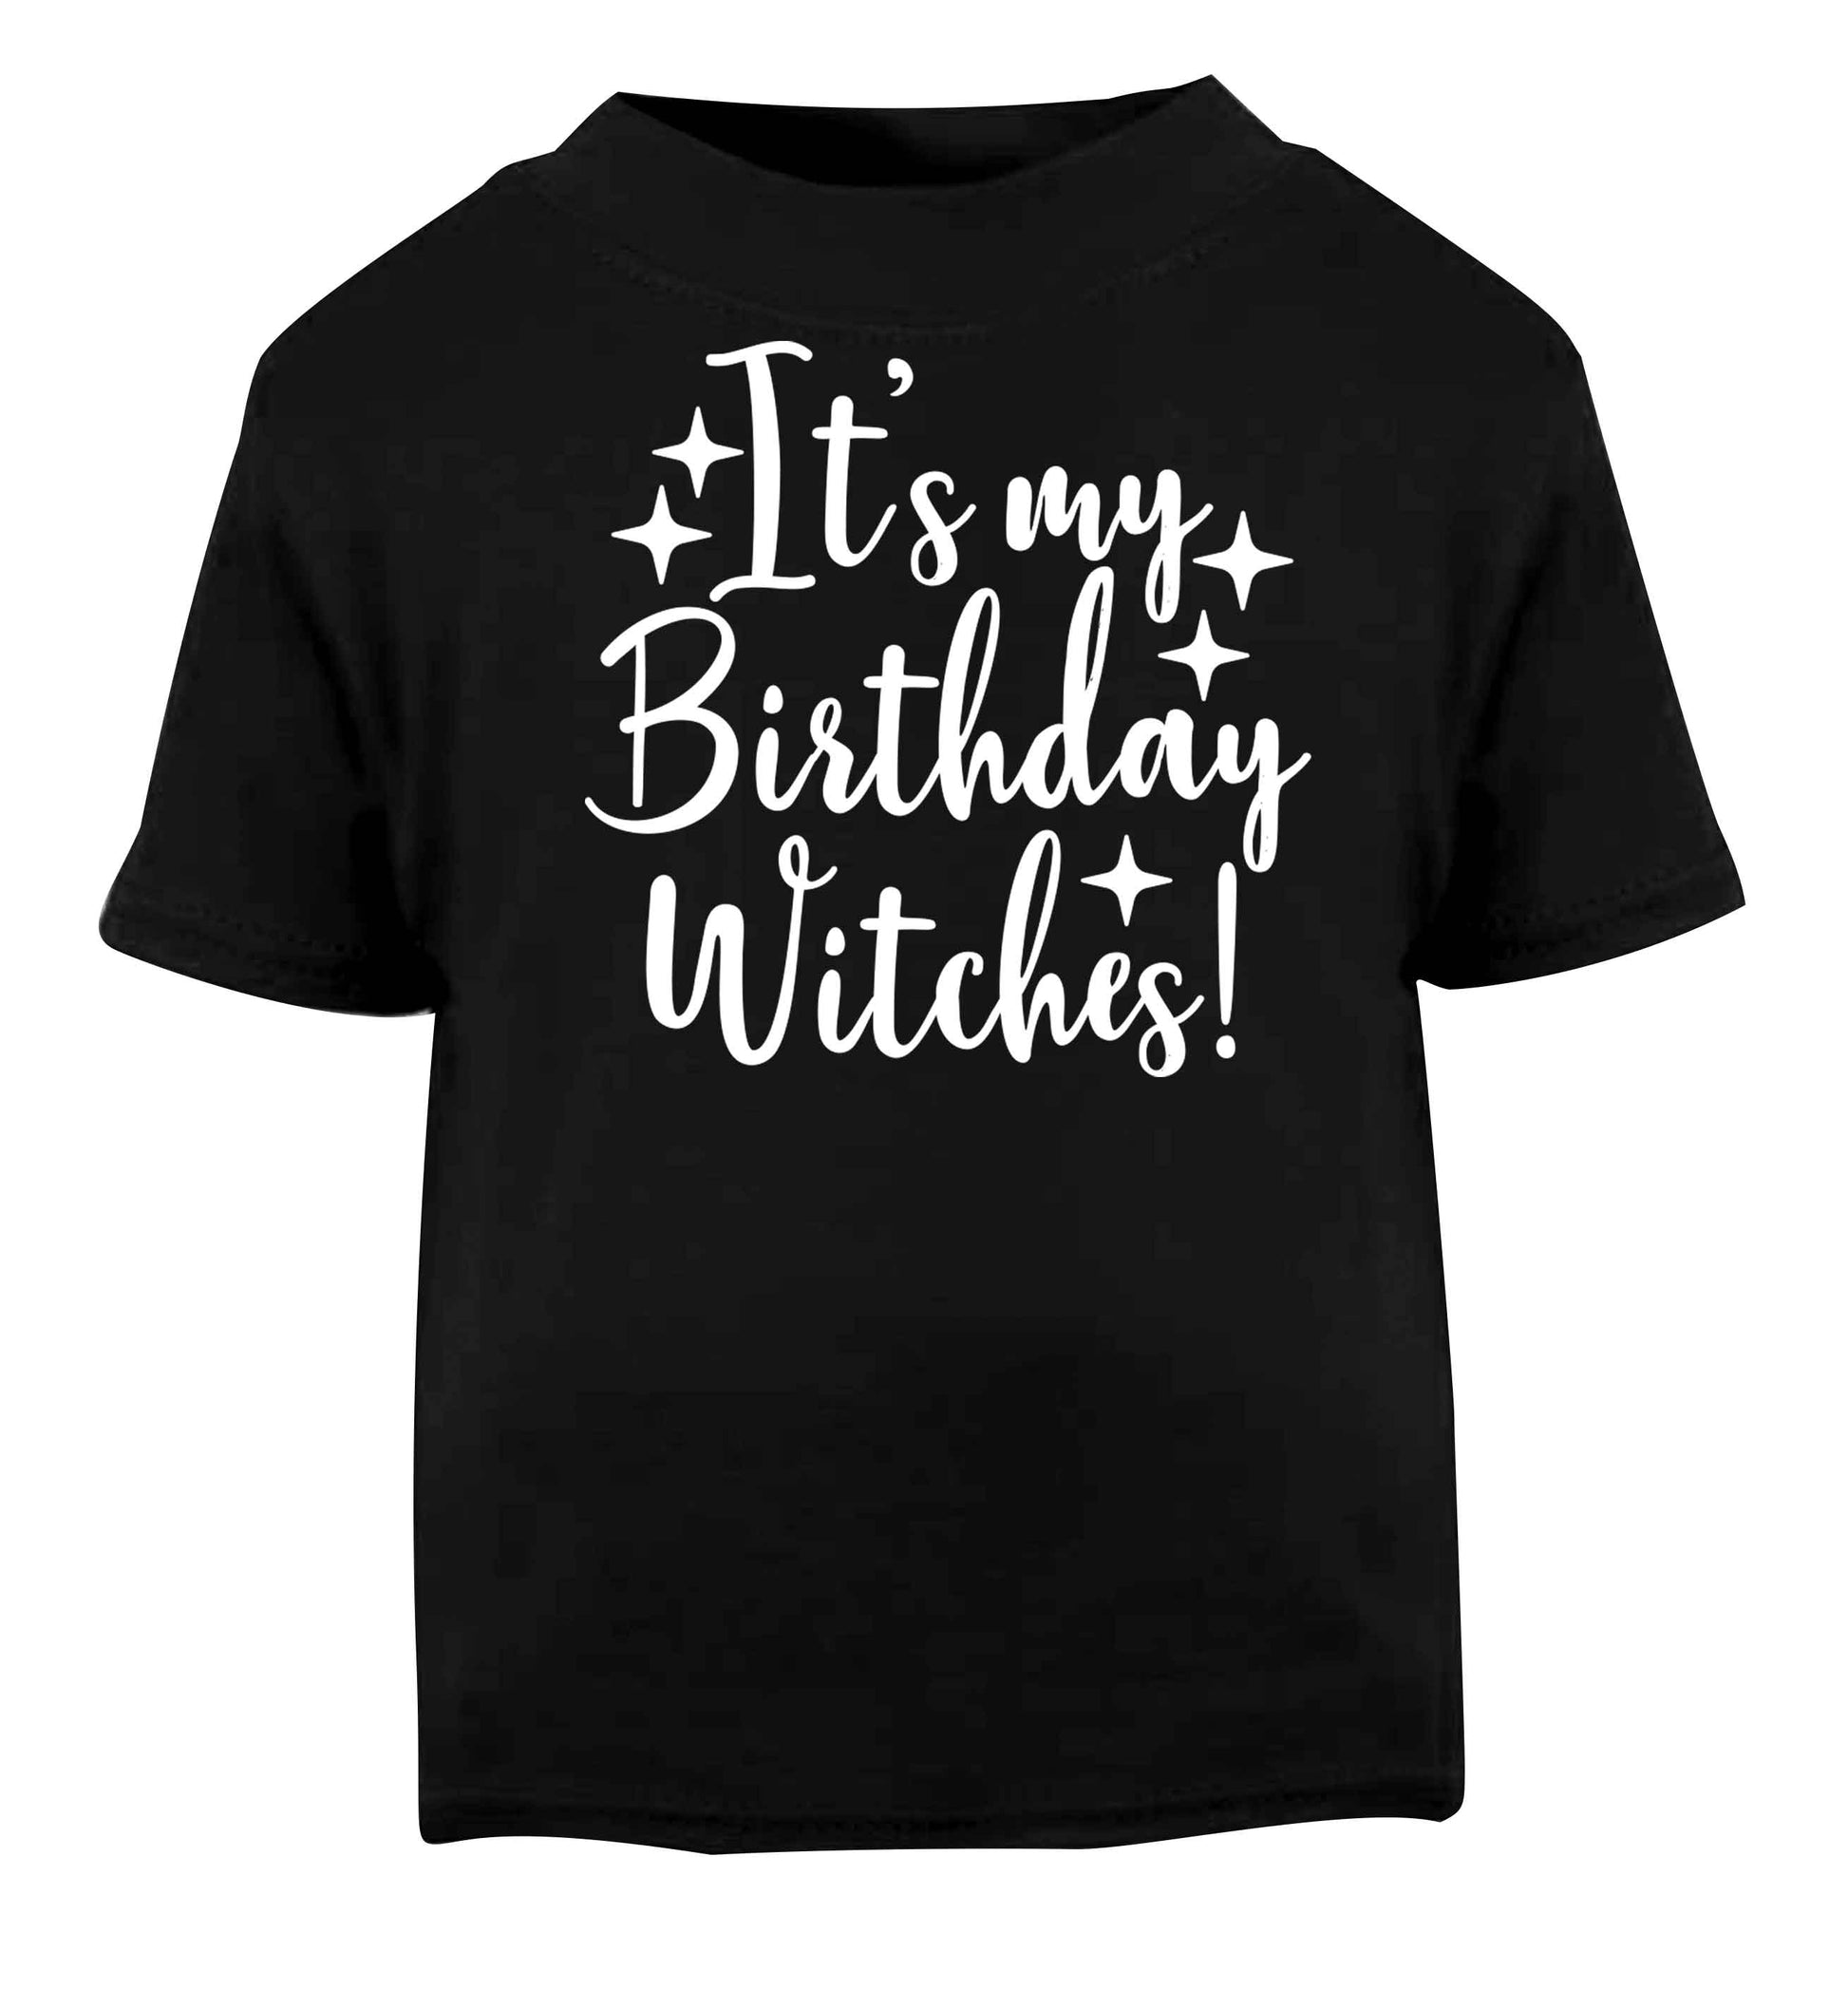 It's my birthday witches!Black baby toddler Tshirt 2 years